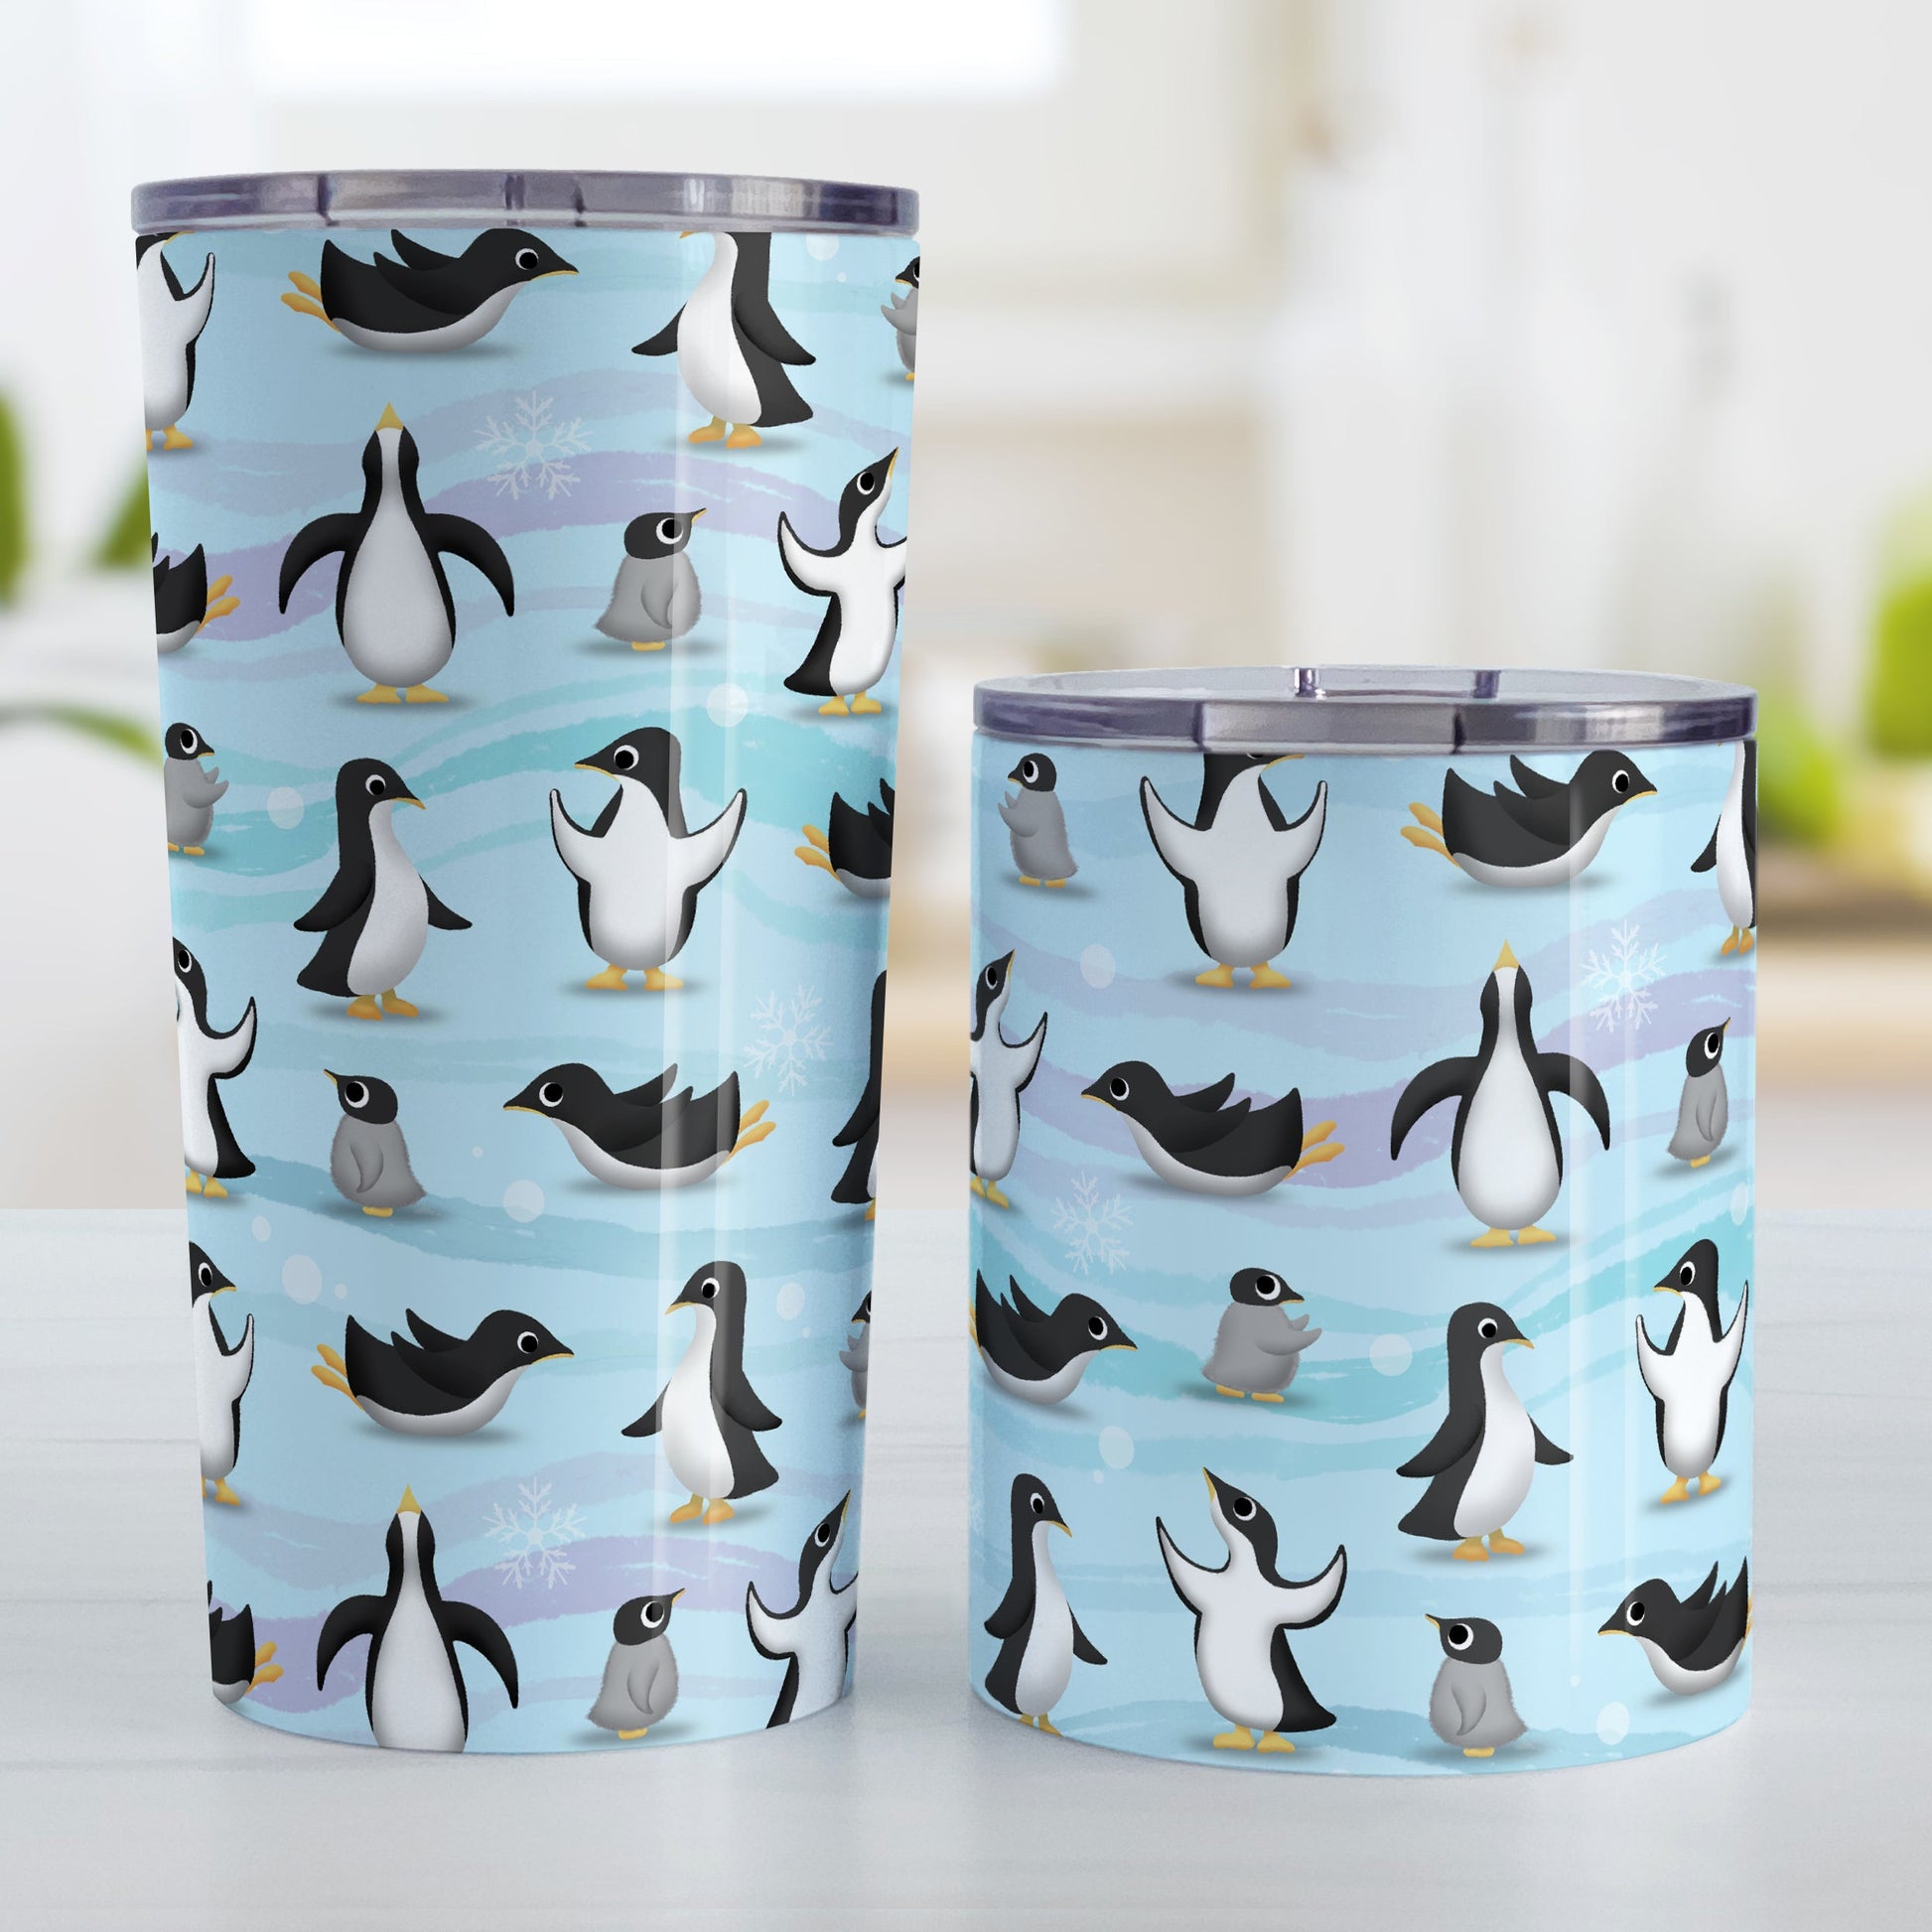 Penguin Parade Pattern Tumbler Cup (20oz and 10oz, stainless steel insulated) at Amy's Coffee Mugs. Tumbler cups designed with a fun penguin parade pattern featuring a variety of penguins and baby penguins over an Antarctic background with waves of blue, turquoise, and purple colors with hints of snowflakes that wraps around the cups. Photo shows both sized cups next to each other.